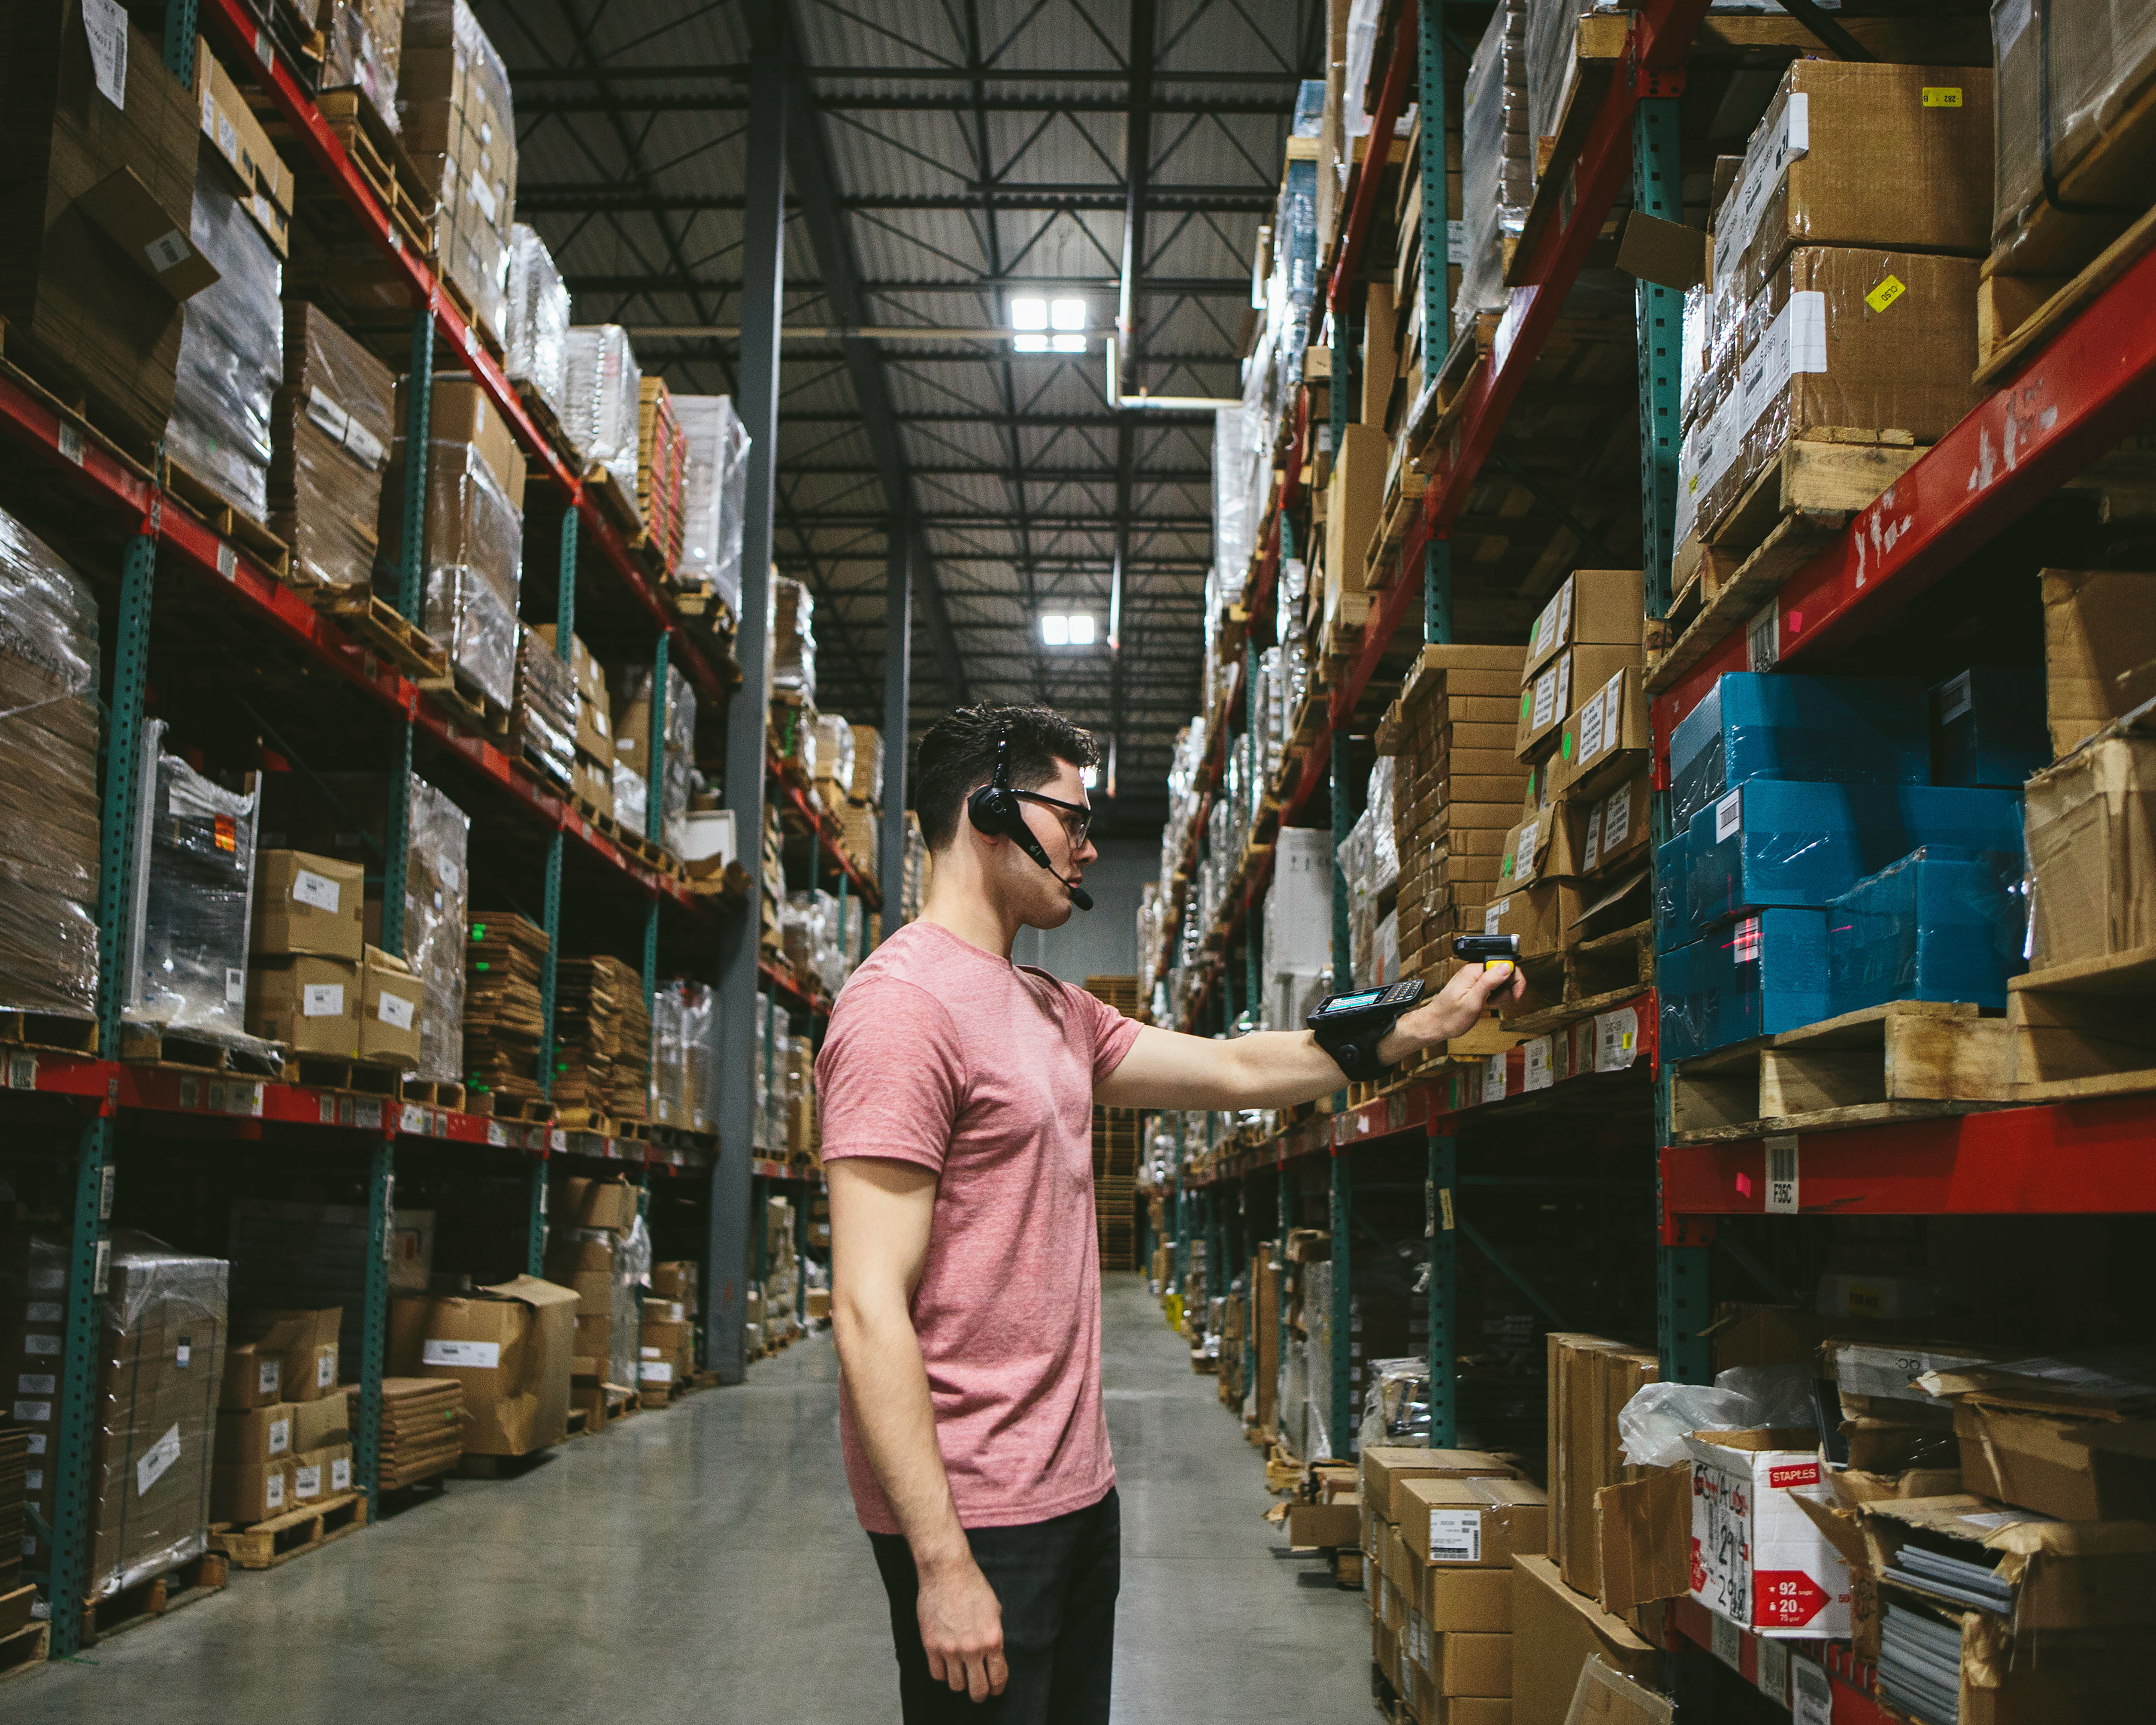 Warehouse worker scans pallets uses the Zebra WT6300 wearable computer on his left arm